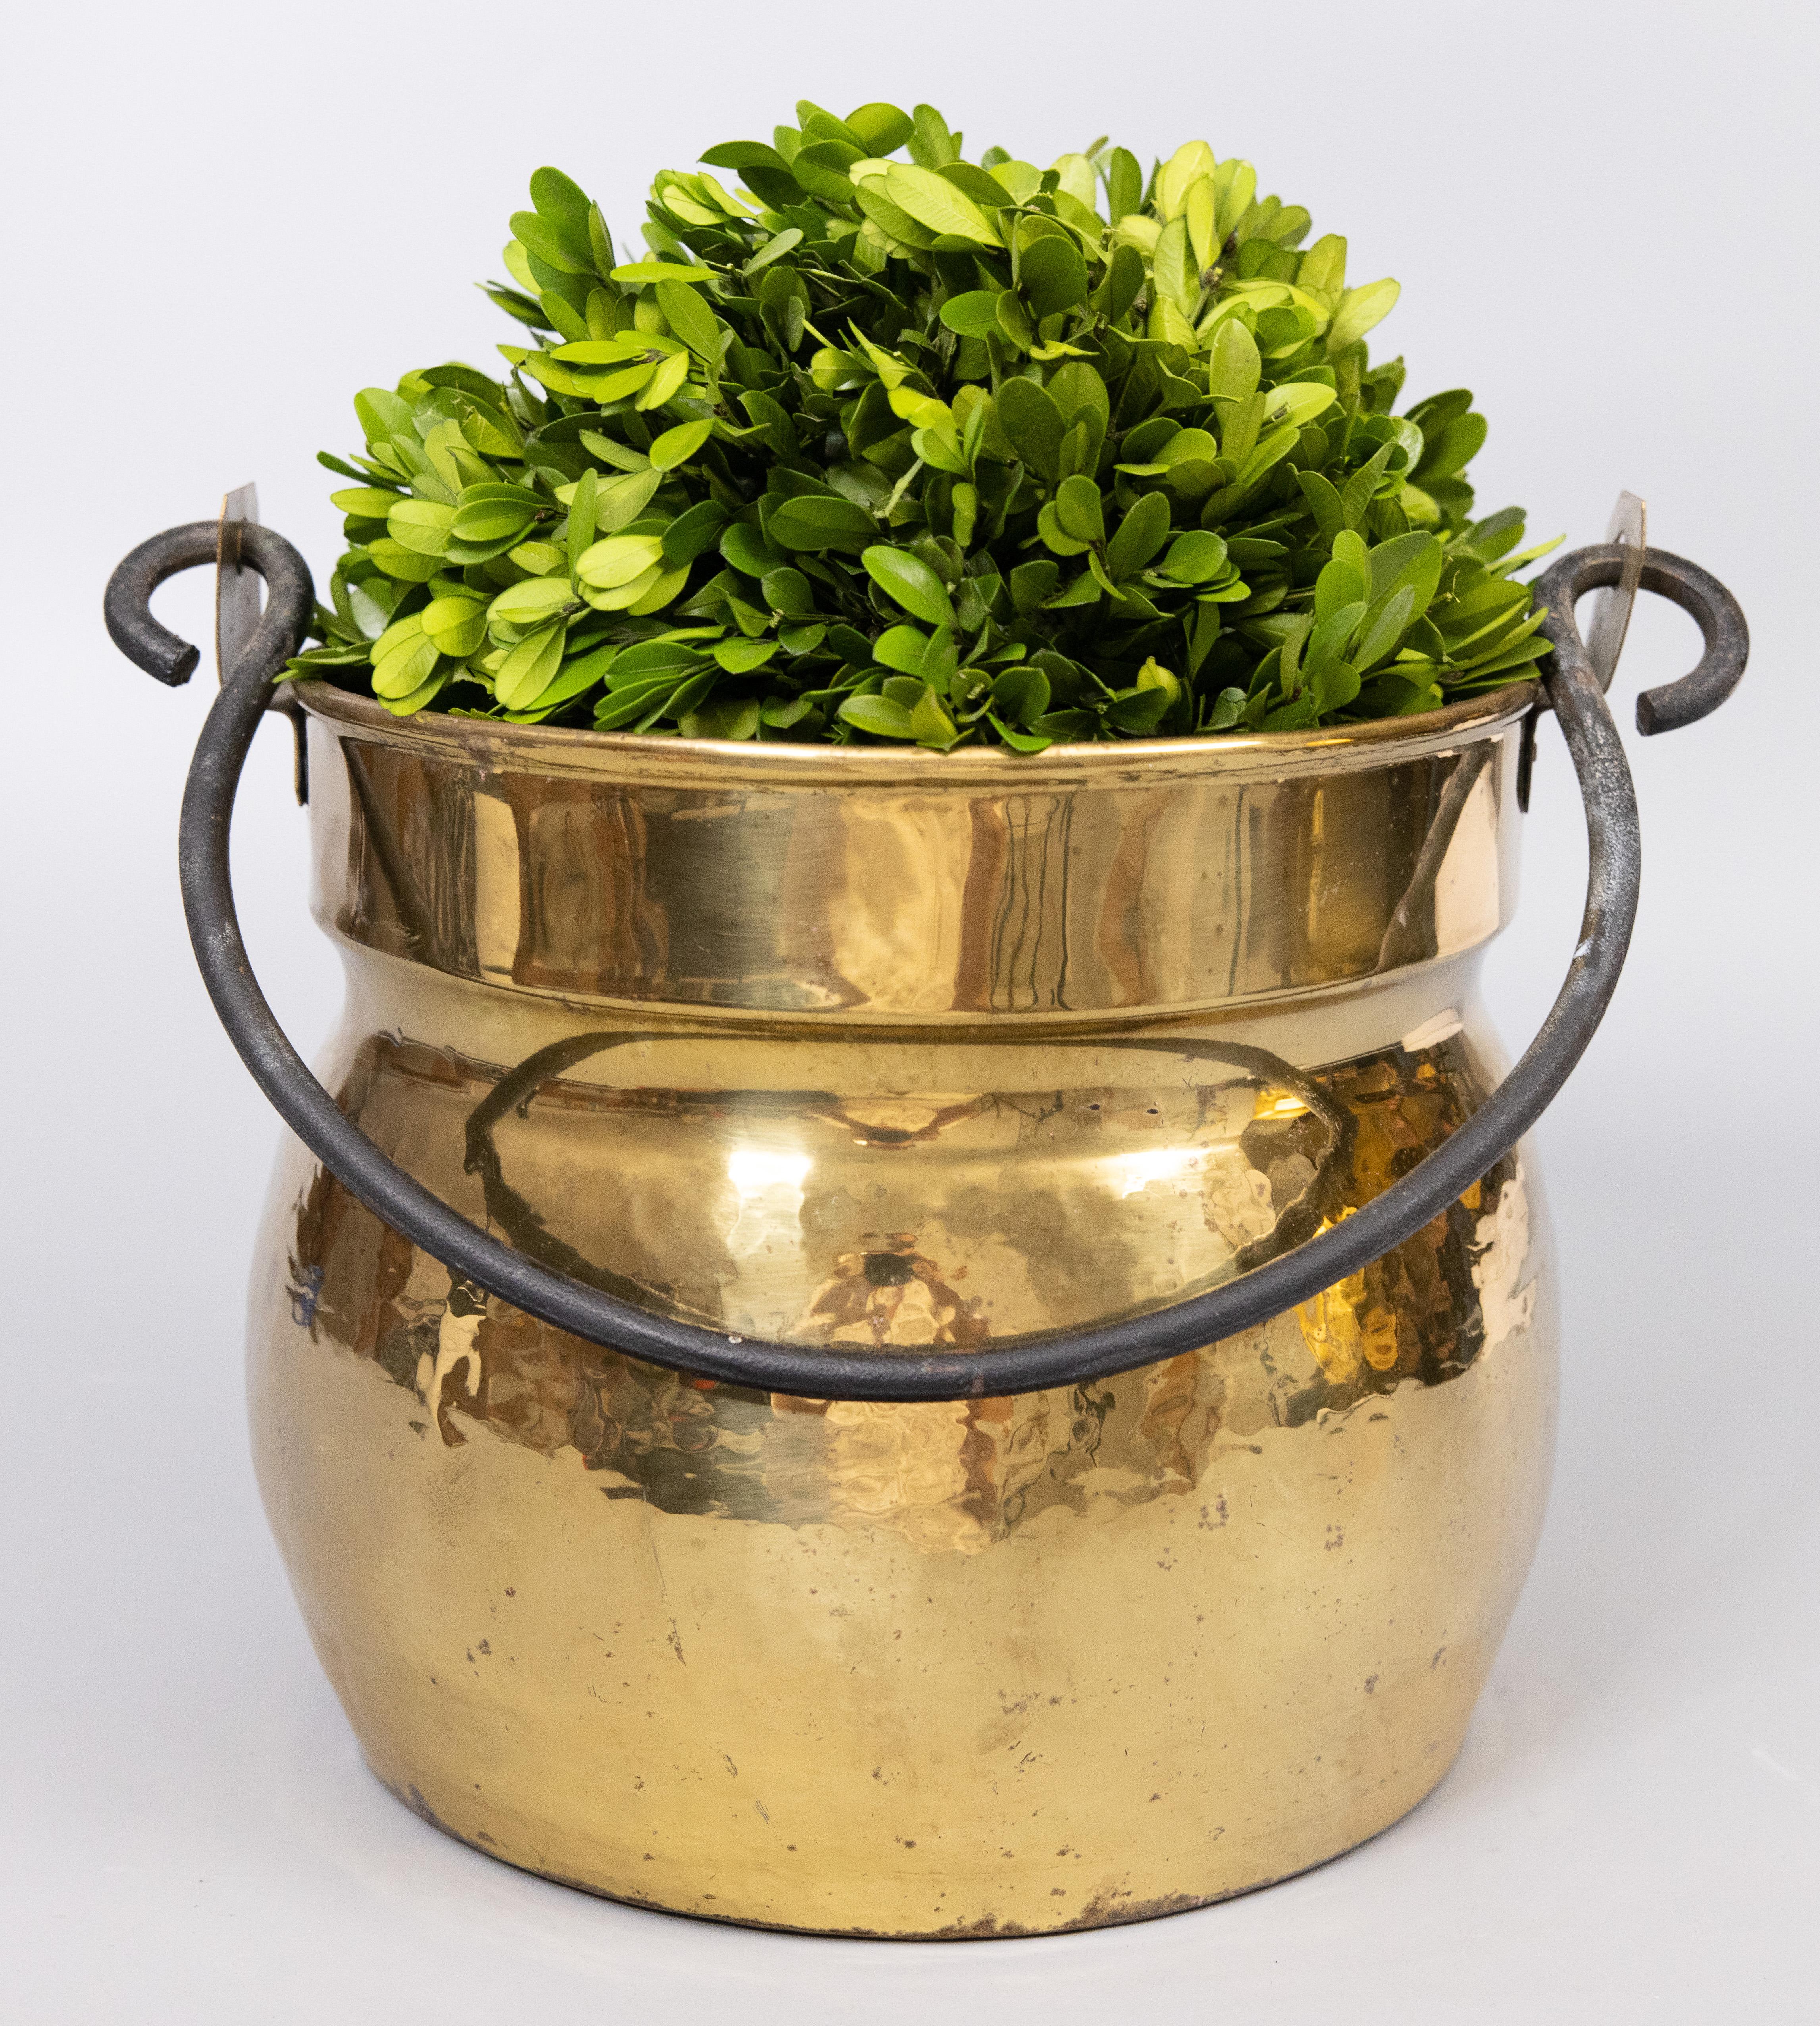 A gorgeous antique early 20th century French hammered brass pot, bucket, jardiniere, or planter with a wrought iron swing handle. This Fine jardiniere is well made and heavy with a lovely patina and would be perfect as a planter.

The diameter is